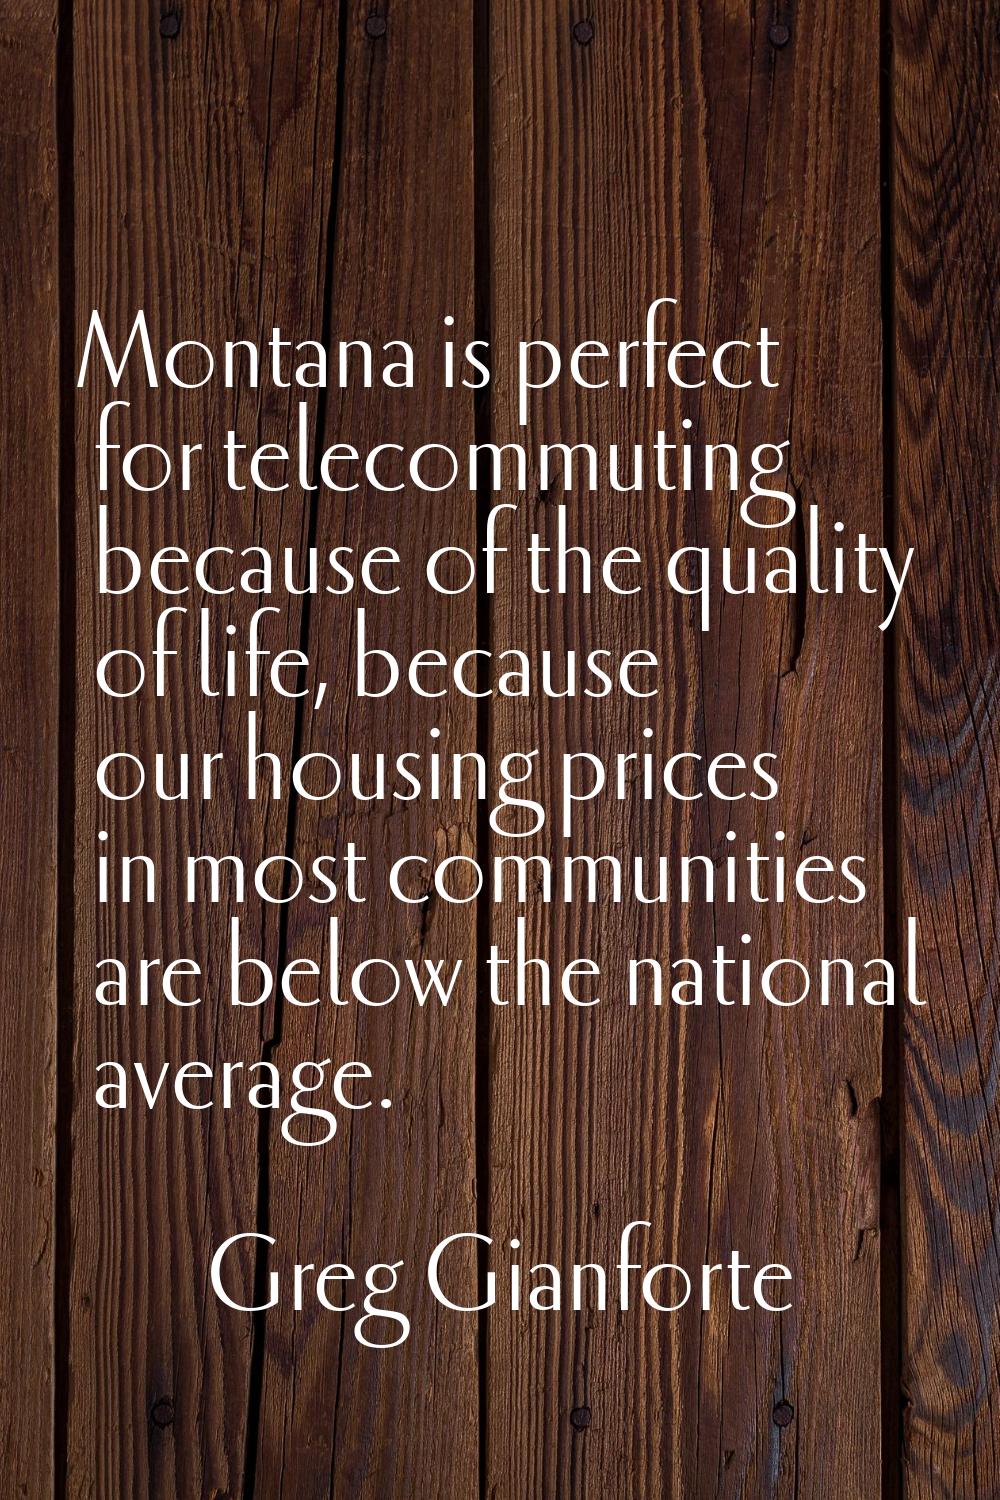 Montana is perfect for telecommuting because of the quality of life, because our housing prices in 